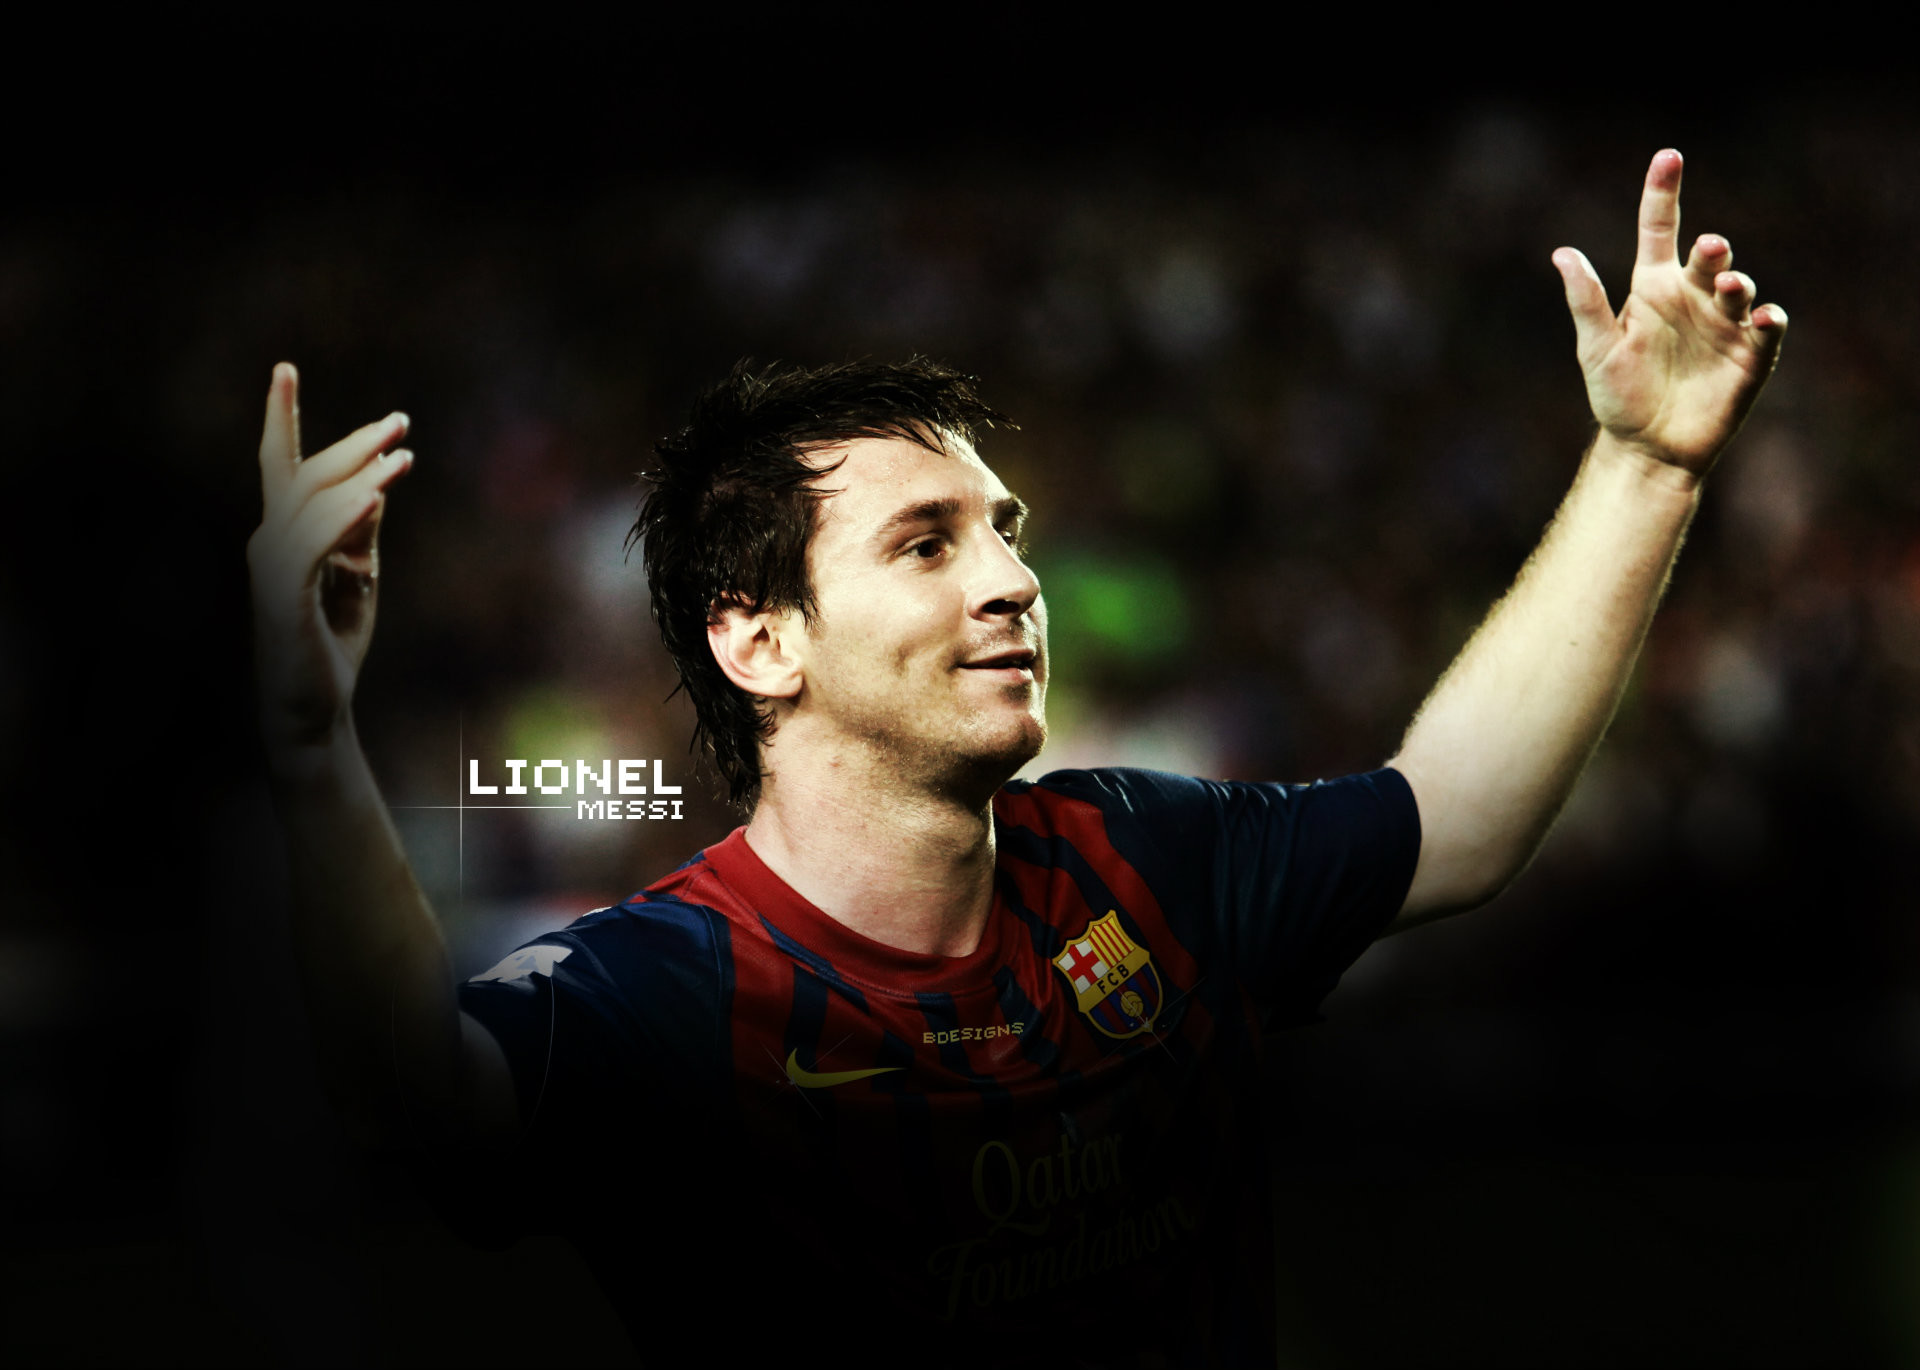 1920x1370 Lionel Messi Wallpapers HD download free | HD Wallpapers | Pinterest | Messi,  Lionel Messi and Wallpapers